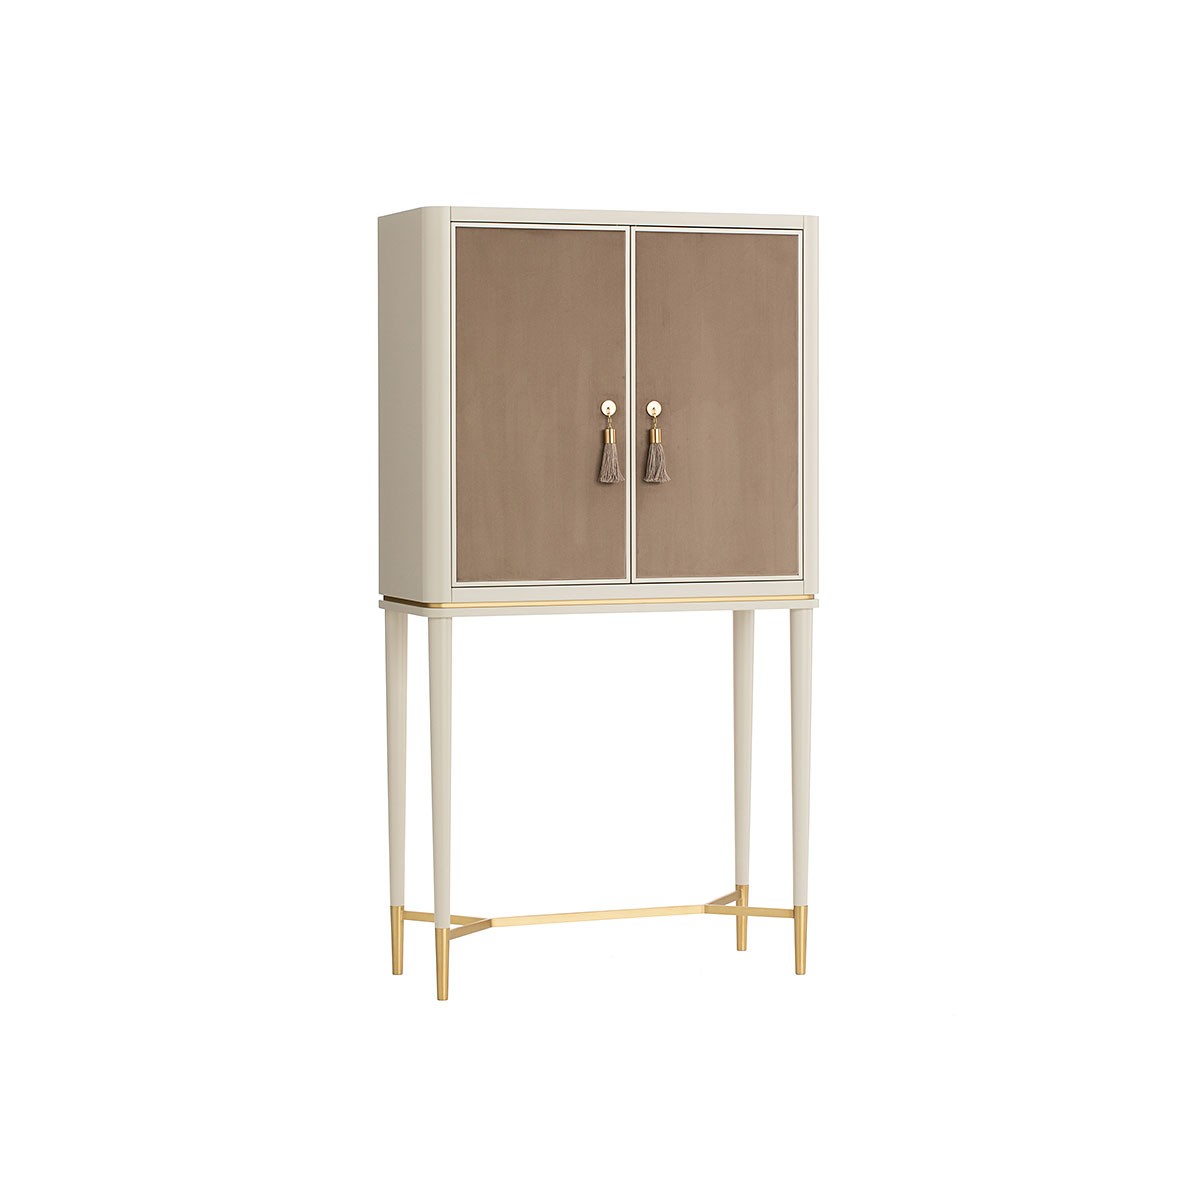 The Adriano Bar Cabinet